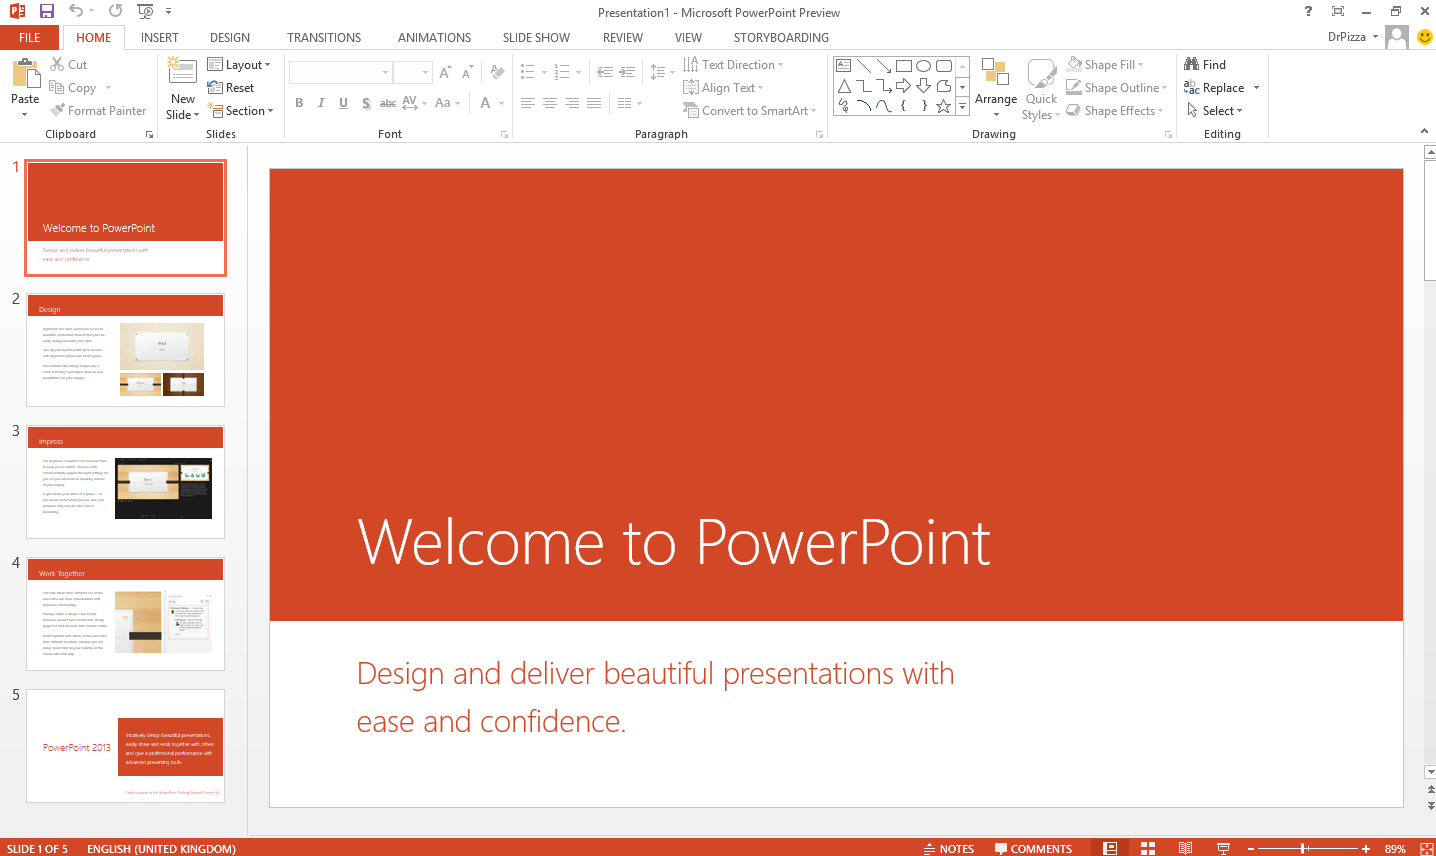 microsoft powerpoint presentation free download for windows 10